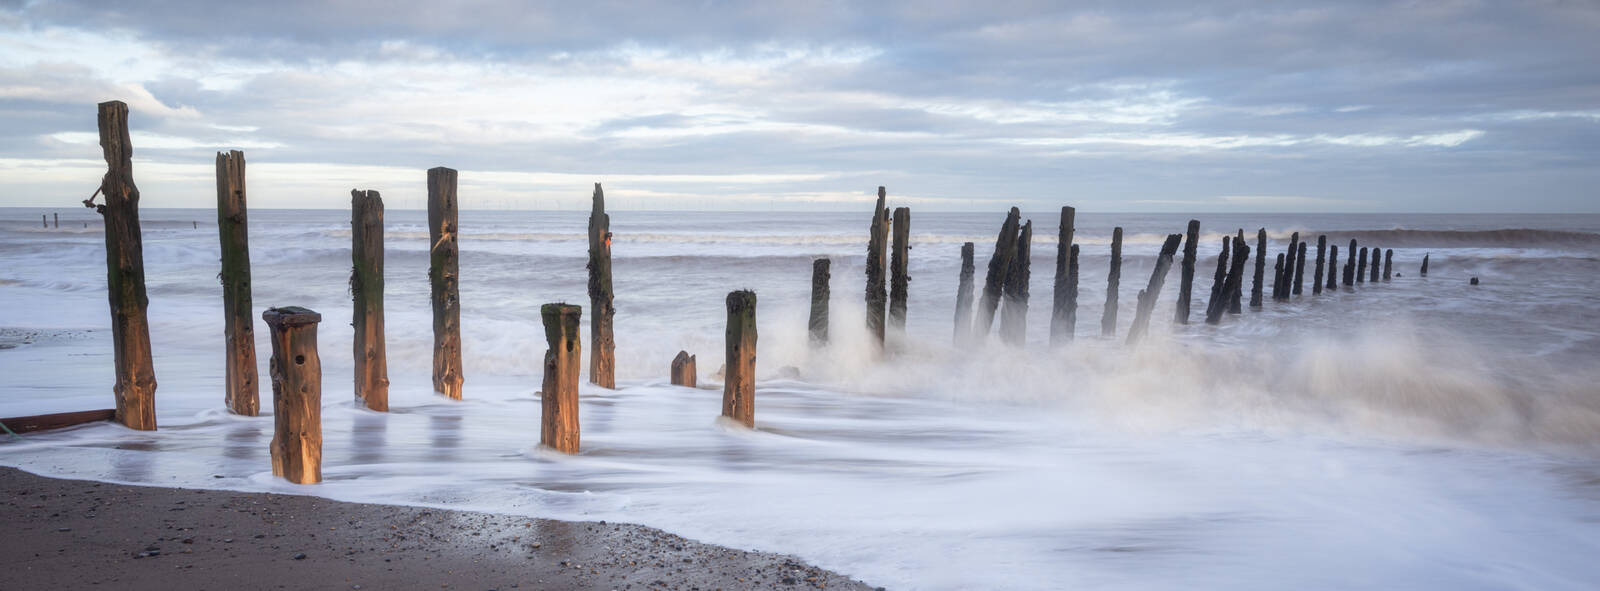 Image of Spurn Point by simon tull